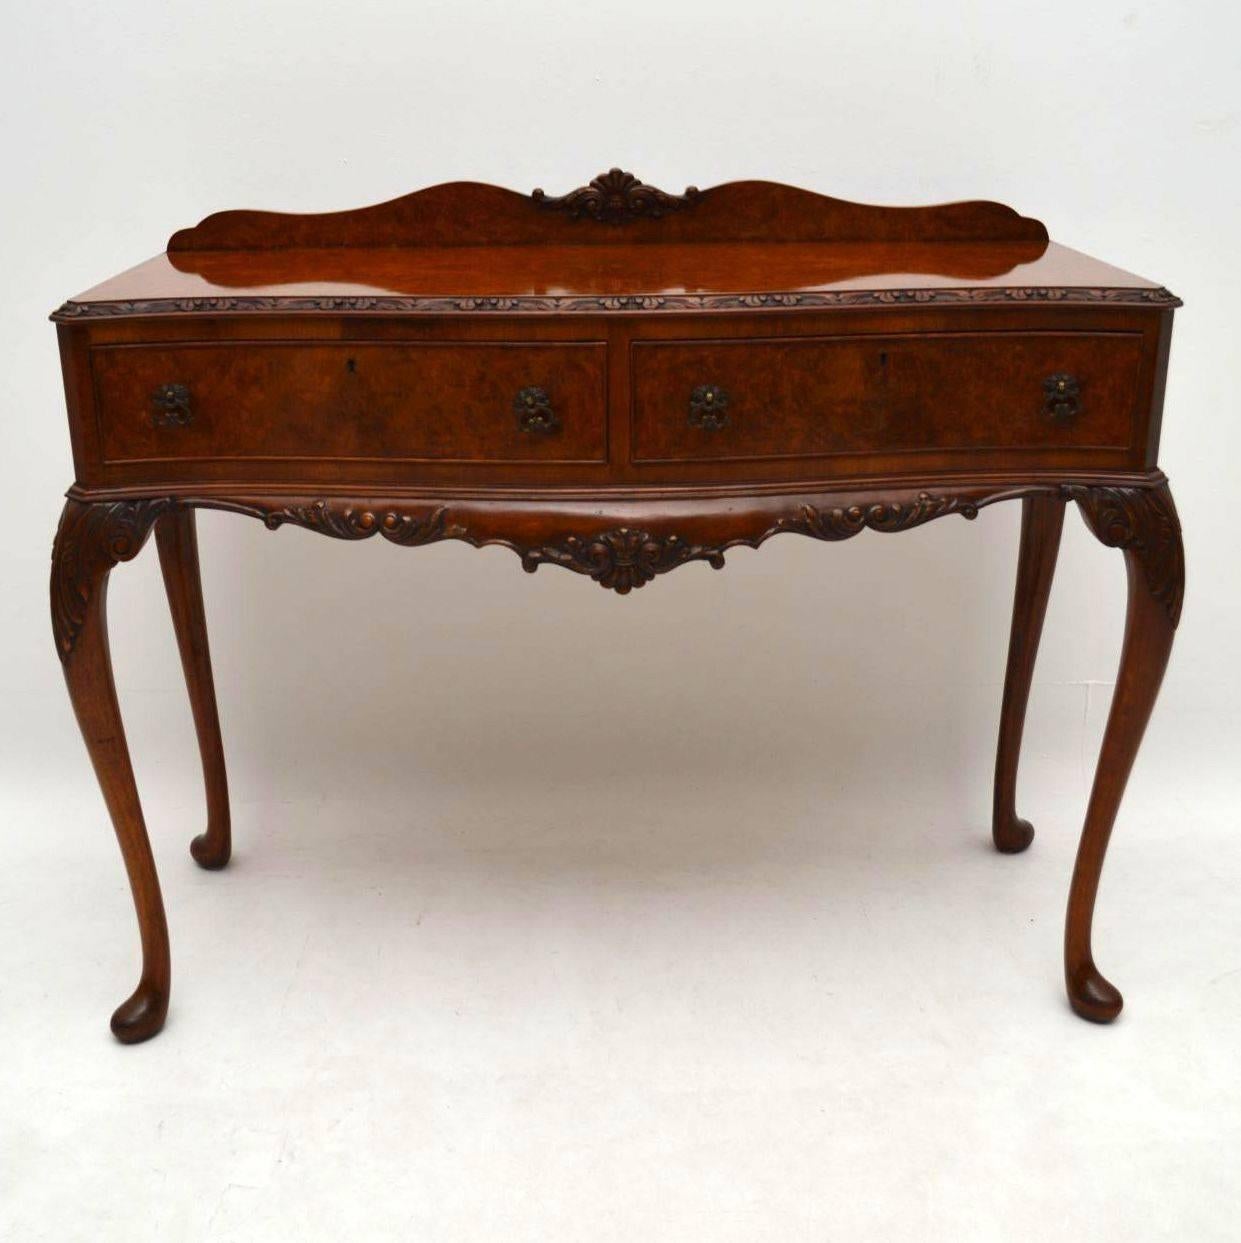 Fine quality antique burr walnut side table server dating from the 1930-1950s period and in good original condition. It has a shaped back gallery, with carving in the middle. The top is a tight burr walnut and it’s carved all around the top. The